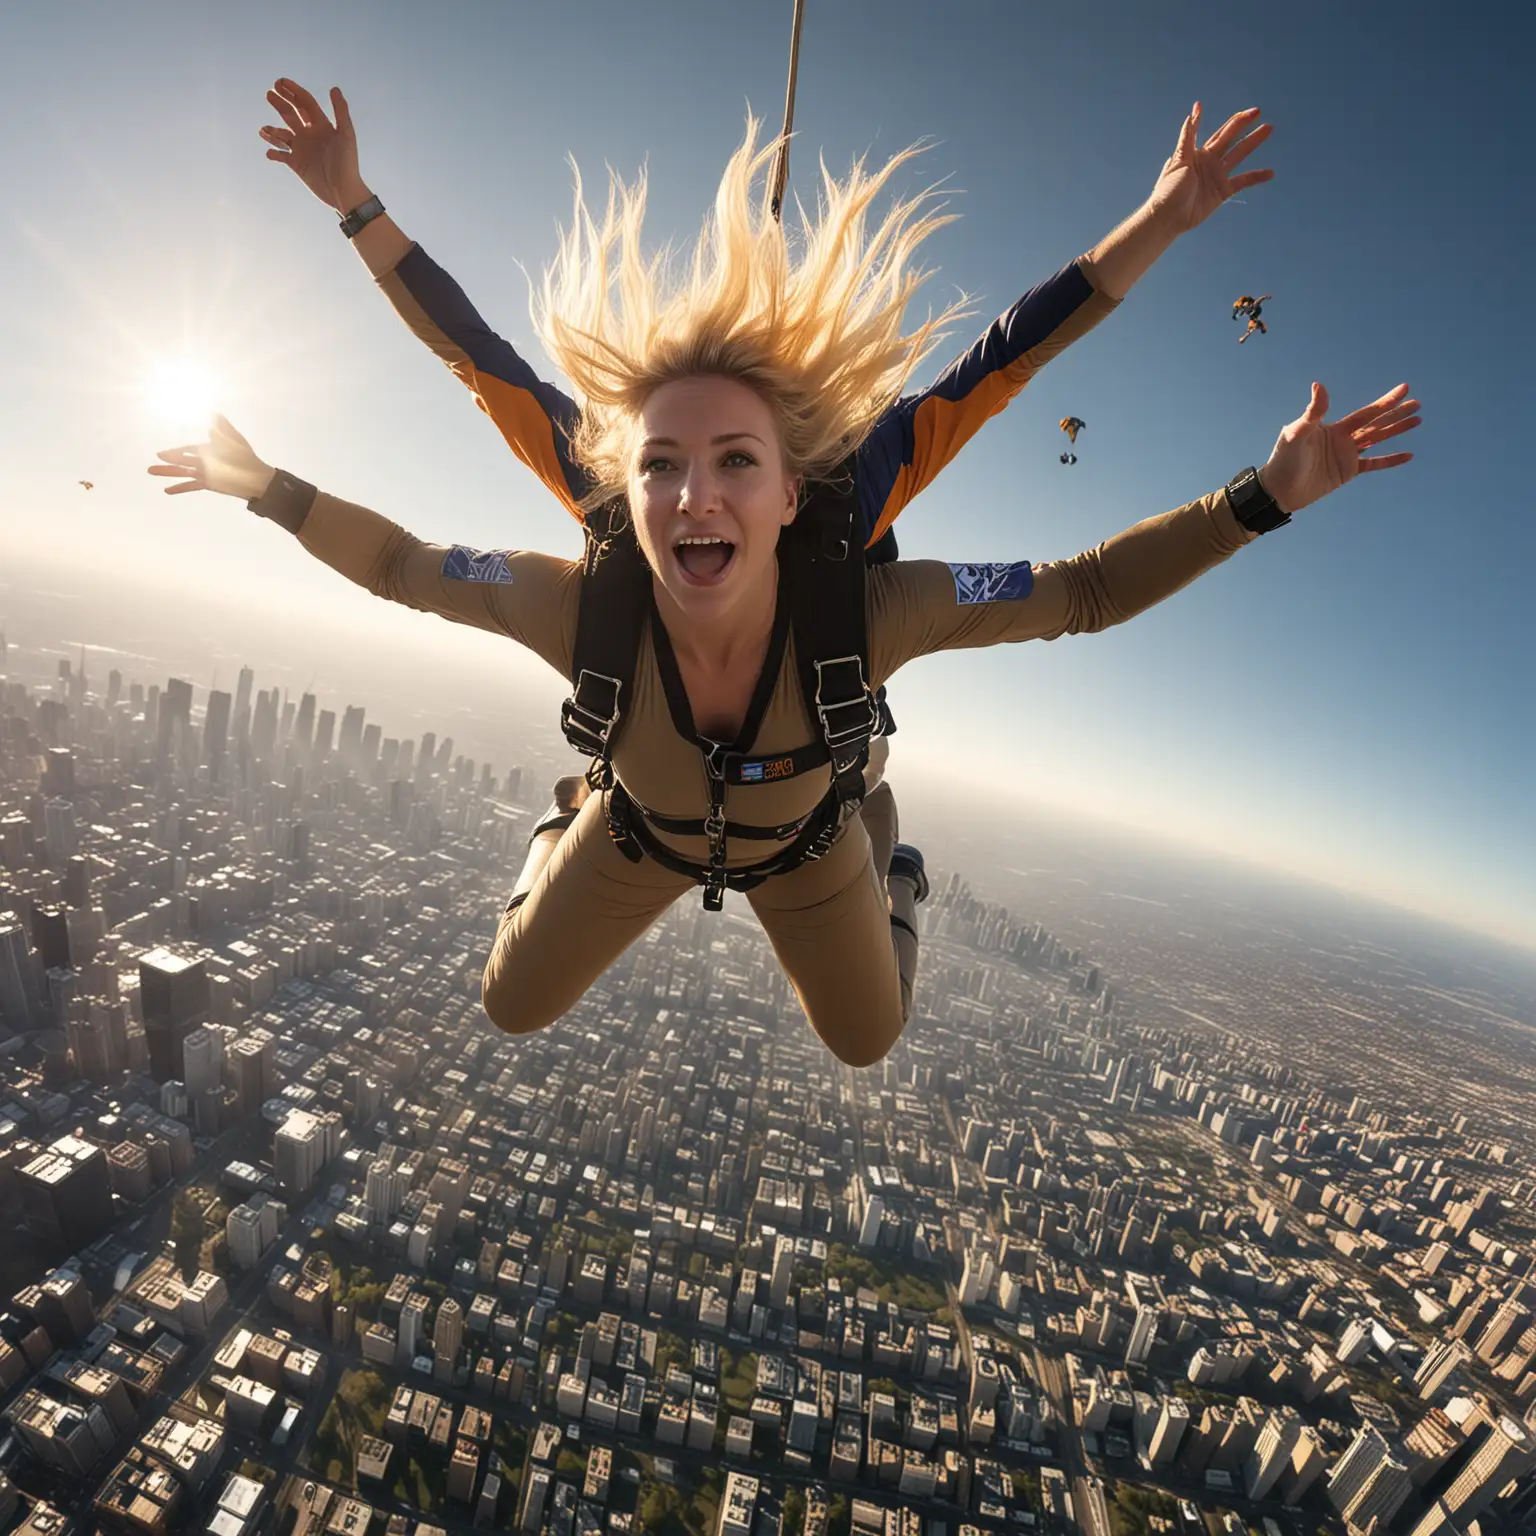 Blonde Woman Skydiving with Parachute Deploying Over City and Forest